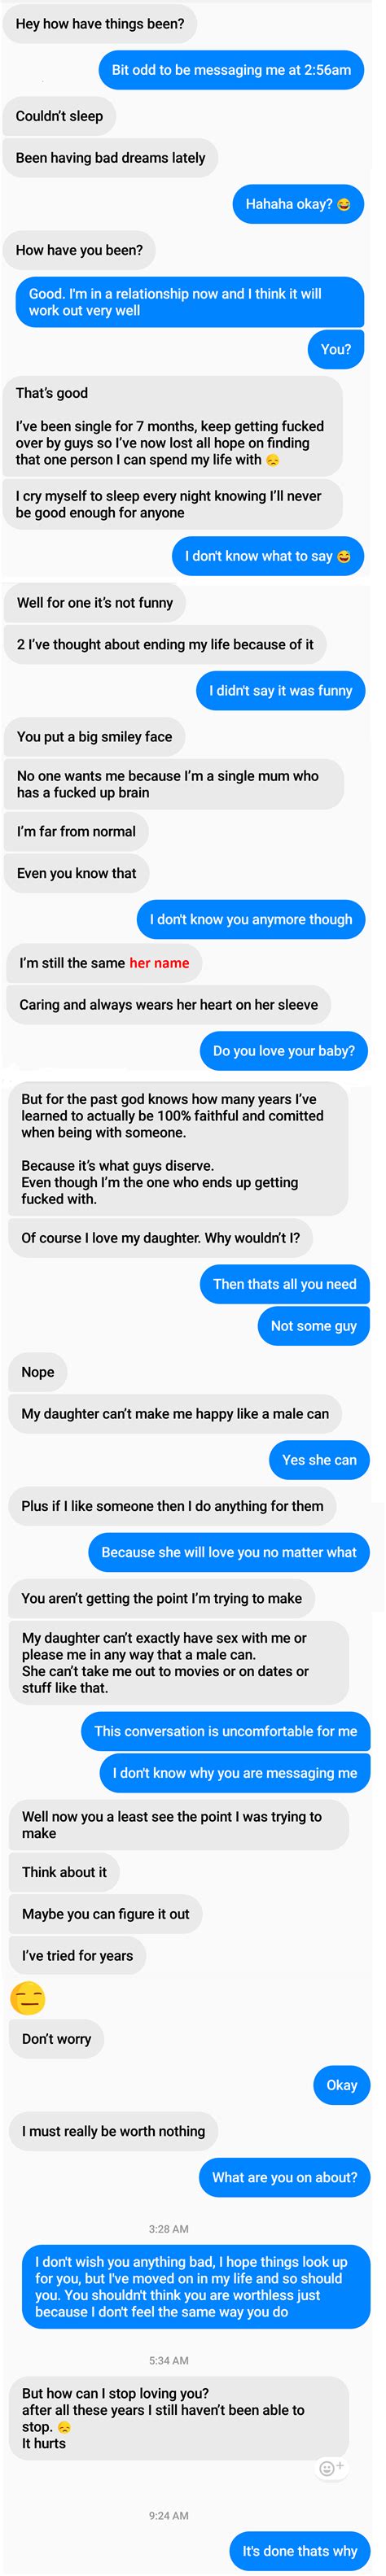 cheating ex messages me after 2 years of us not talking